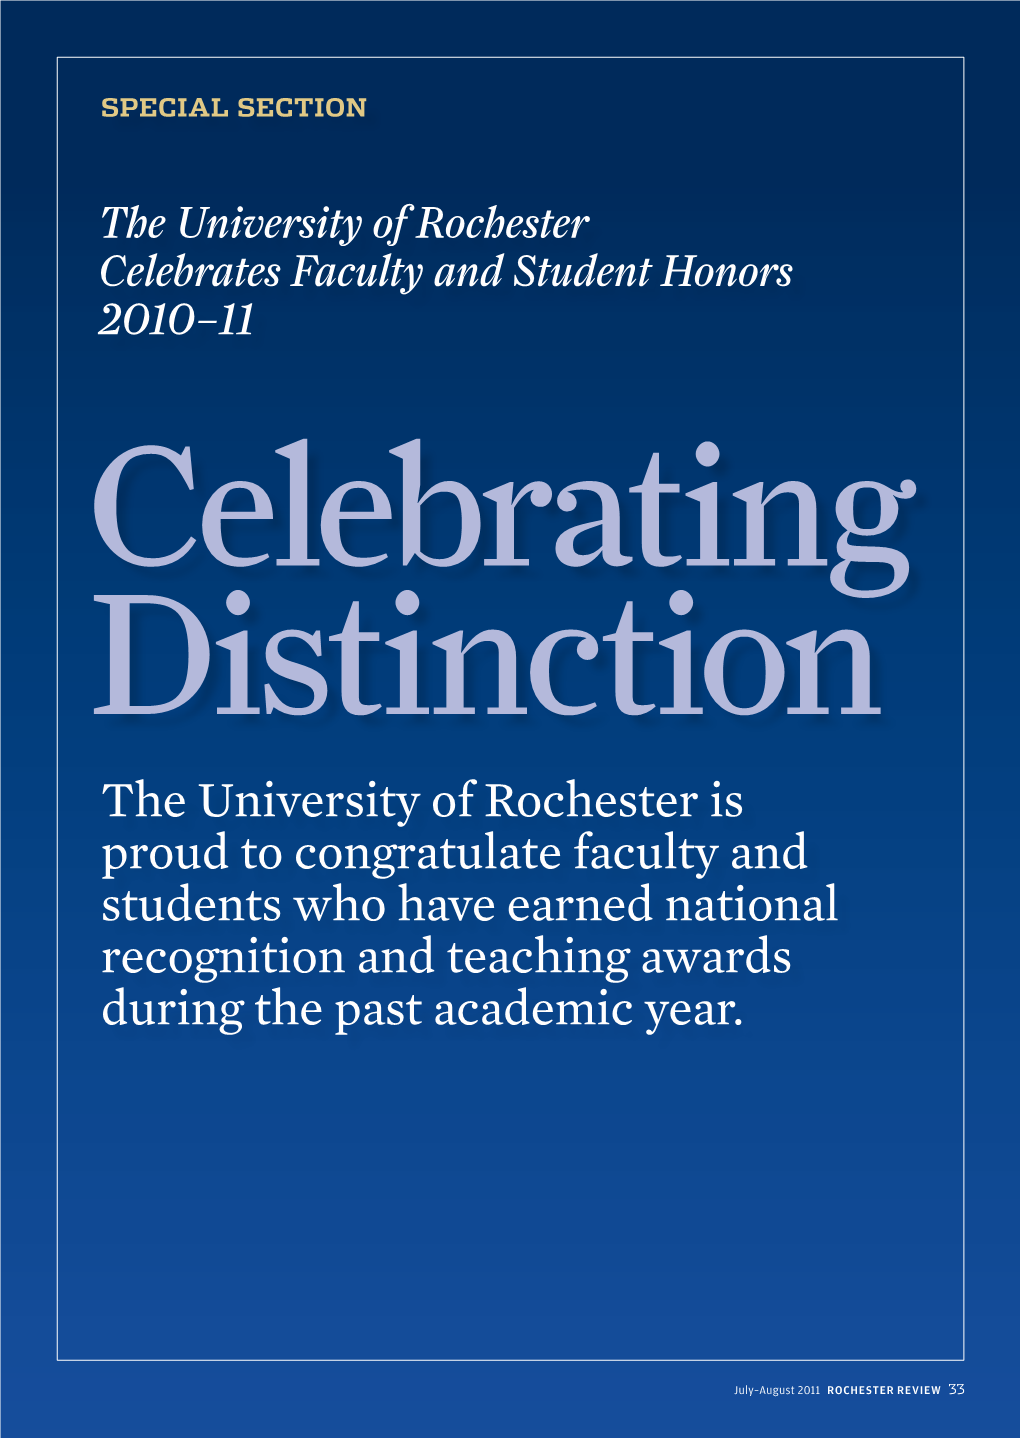 The University of Rochester Is Proud to Congratulate Faculty and Students Who Have Earned National Recognition and Teaching Awards During the Past Academic Year